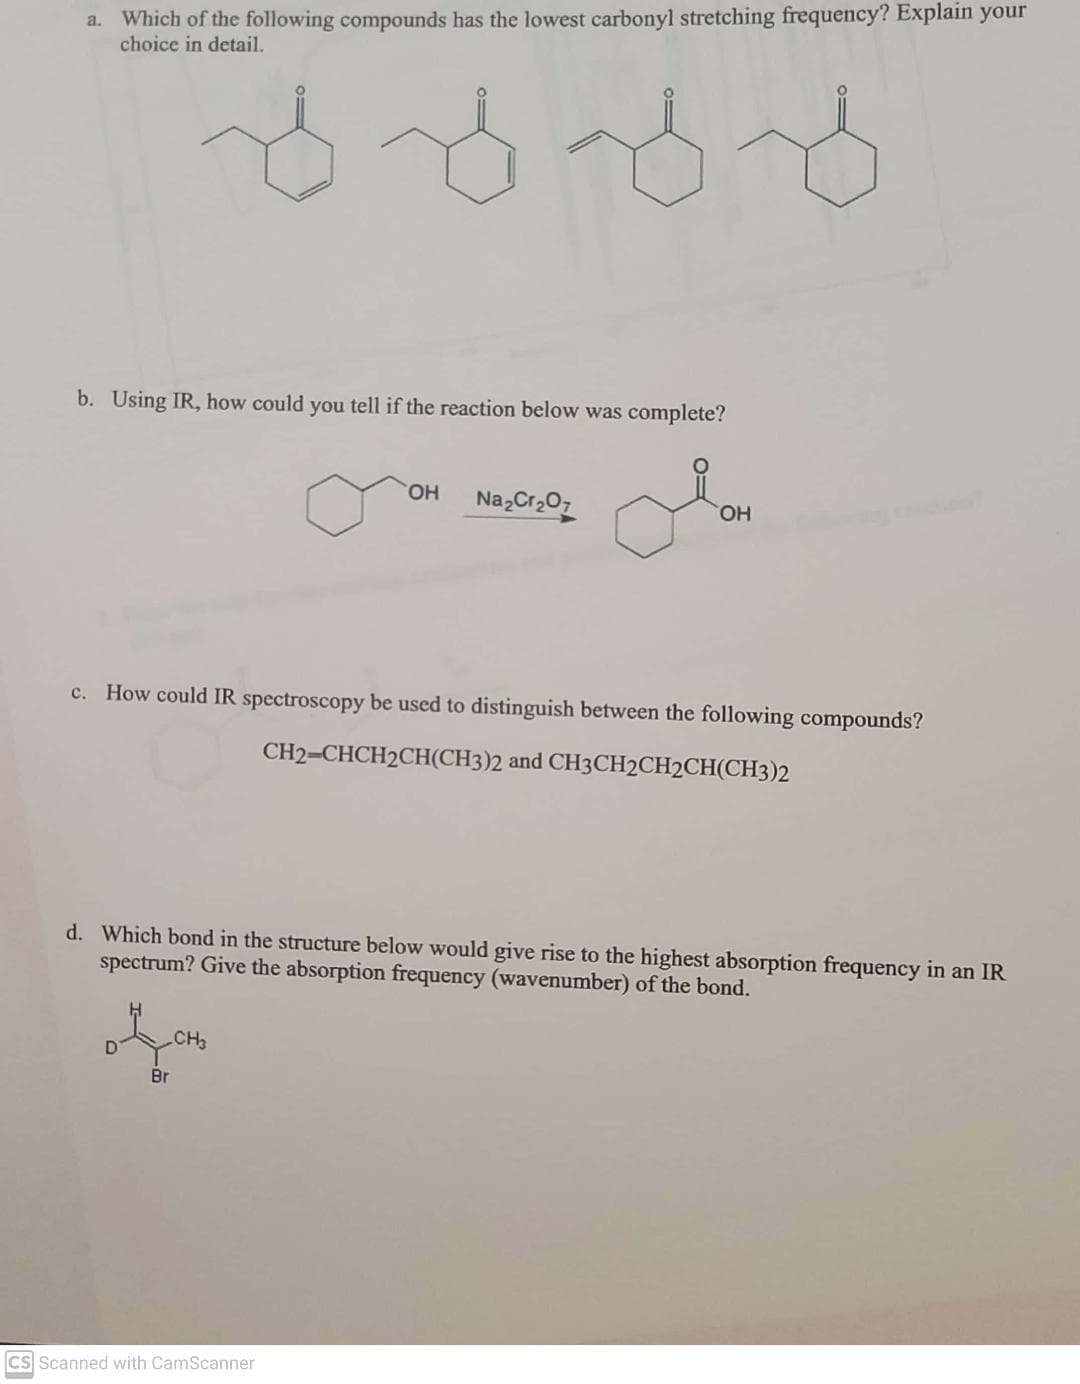 a. Which of the following compounds has the lowest carbonyl stretching frequency? Explain your
choice in detail.
b. Using IR, how could you tell if the reaction below was complete?
HO.
NazCr207
HO.
c. How could IR spectroscopy be used to distinguish between the following compounds?
CH2=CHCH2CH(CH3)2 and CH3CH2CH2CH(CH3)2
d. Which bond in the structure below would give rise to the highest absorption frequency in an IR
spectrum? Give the absorption frequency (wavenumber) of the bond.
CH
Br
CS Scanned with CamScanner
